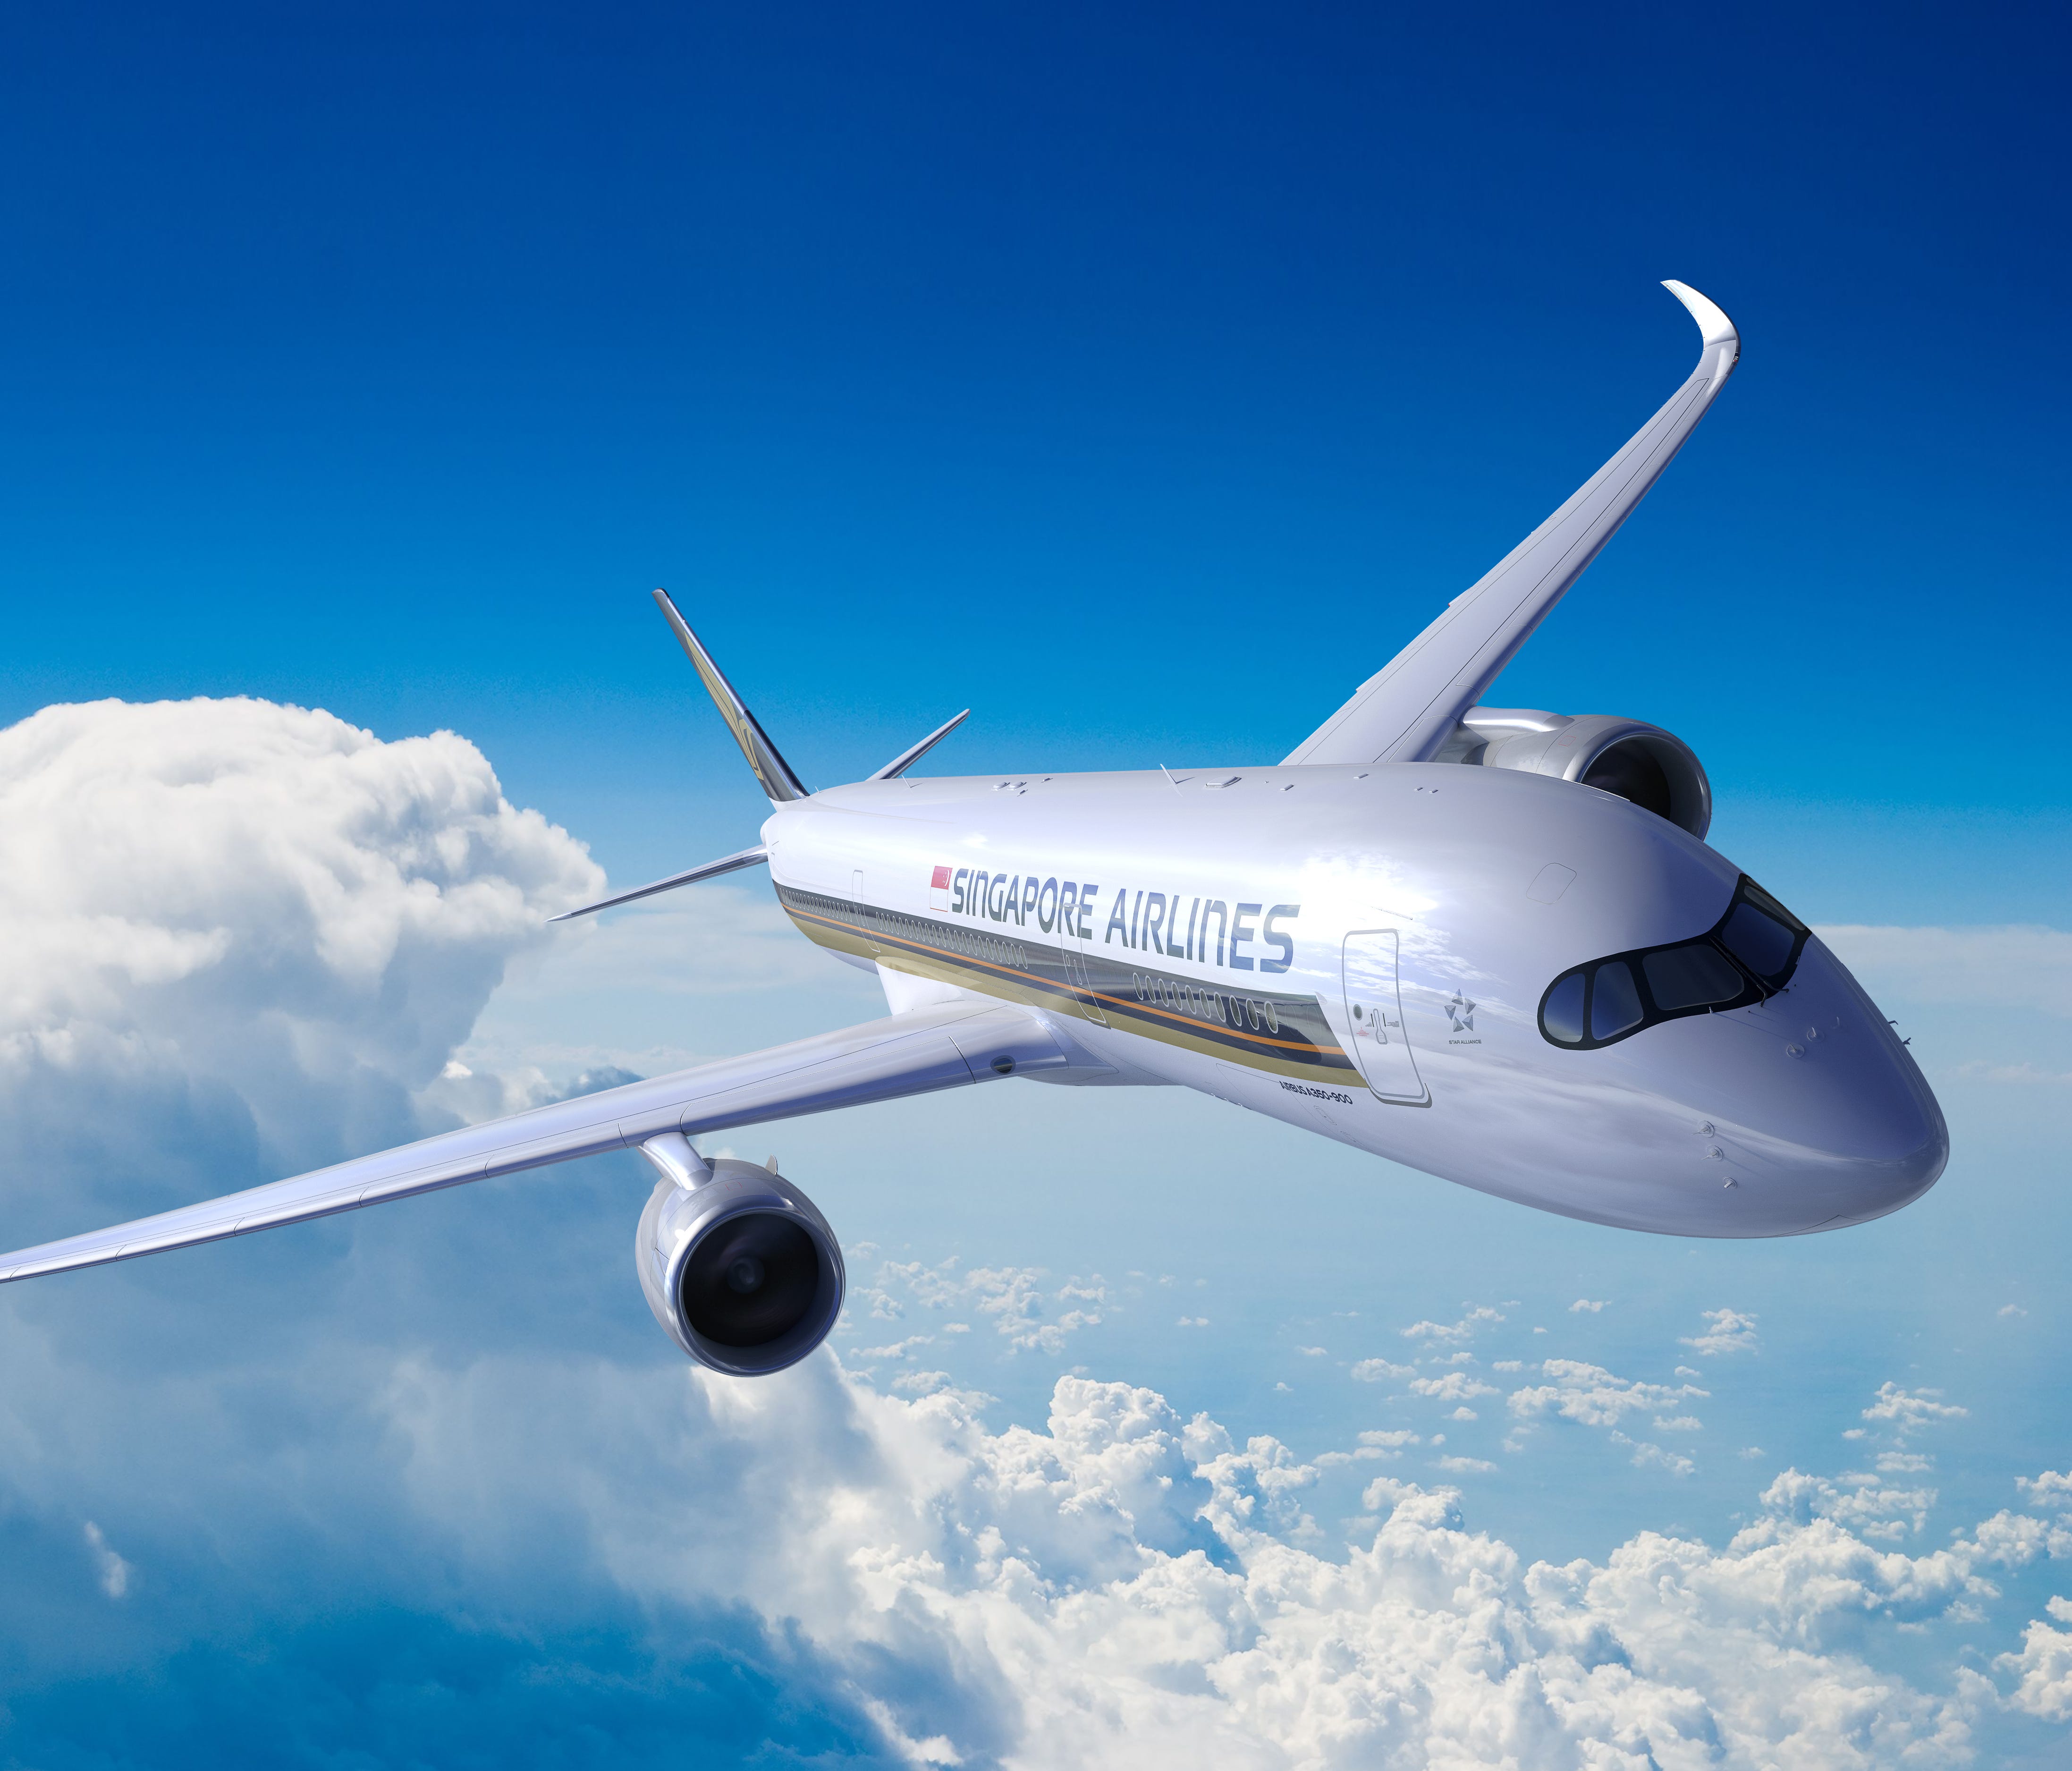 This rendering provided by Singapore Airlines shows one of the carrier's new Airbus A350-900 